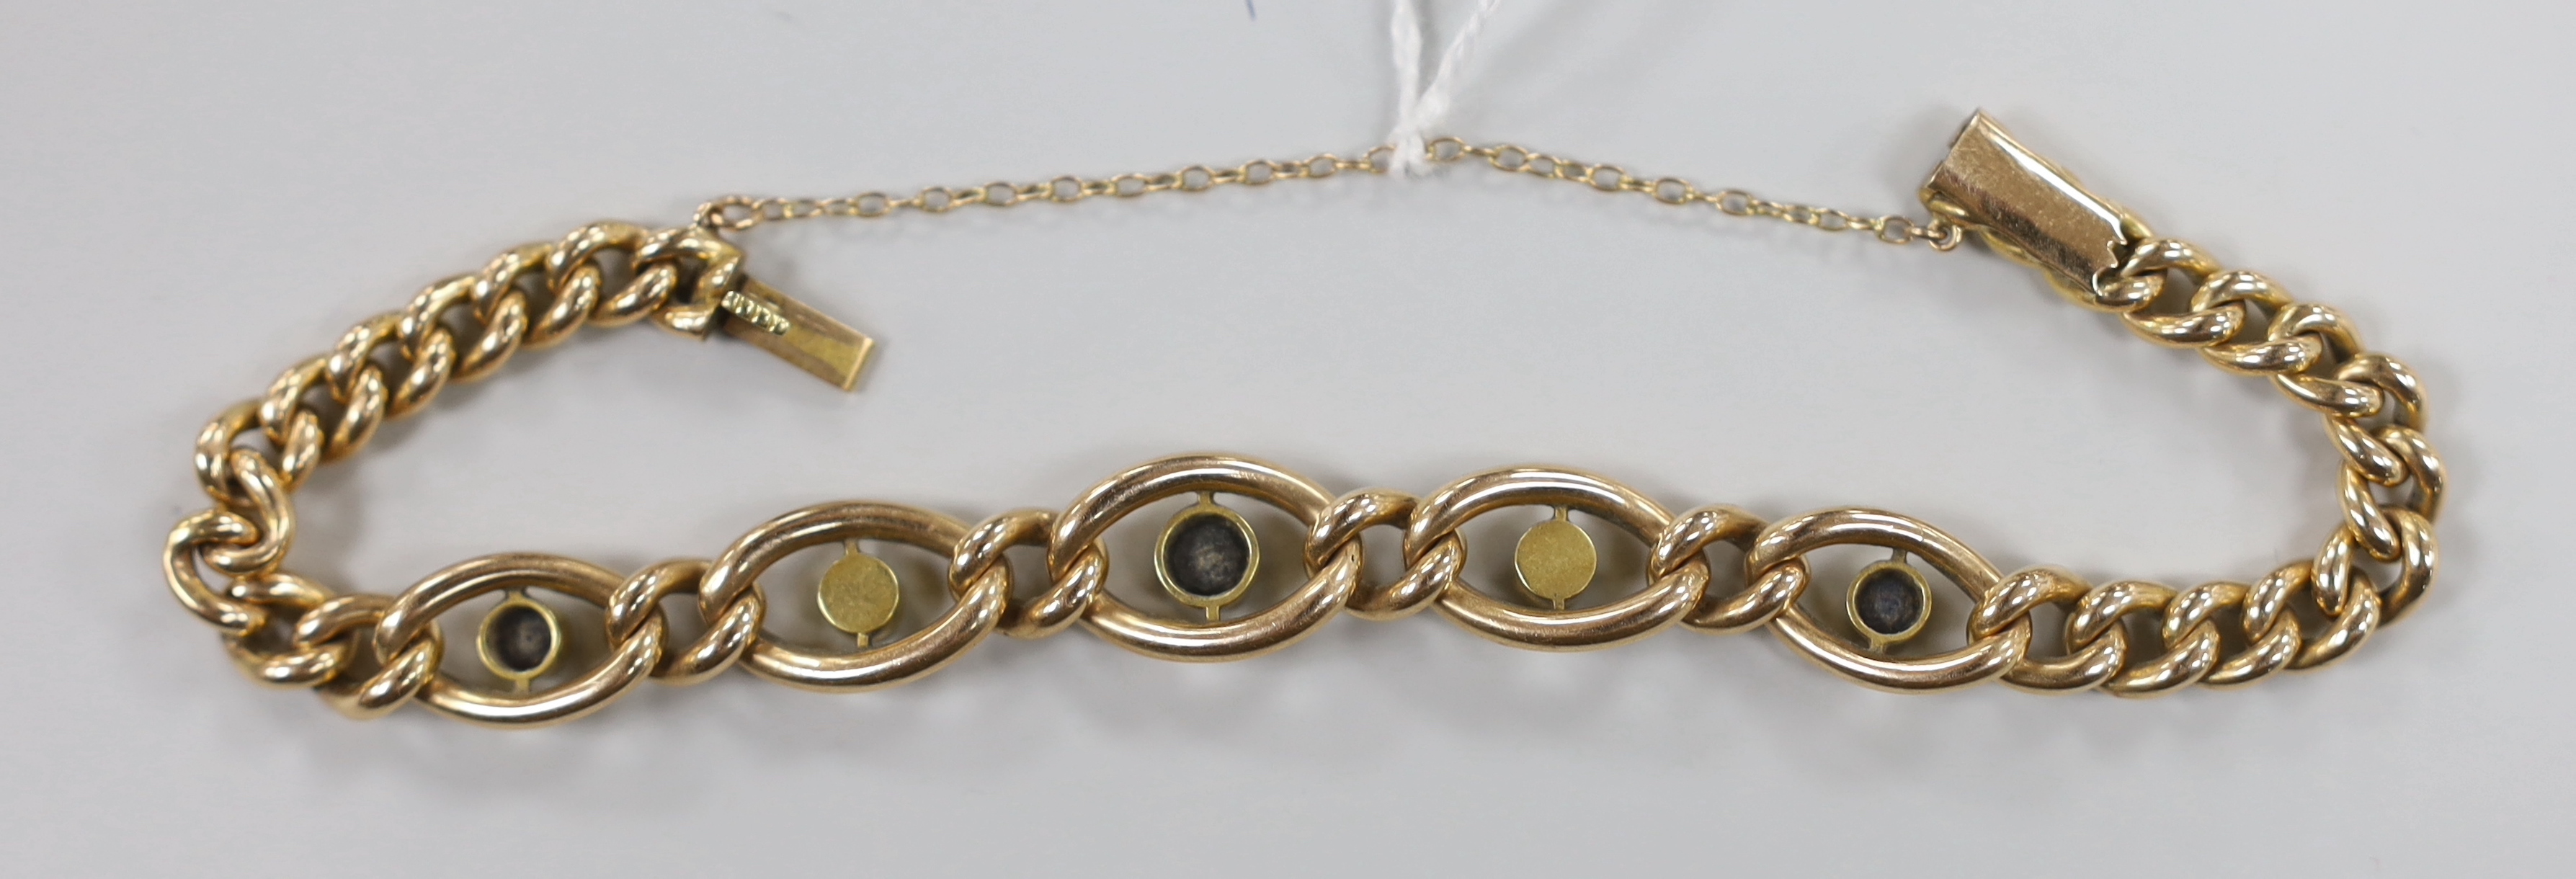 An Edwardian 15ct, sapphire and seed pearl set curb link bracelet, approx. 18cm